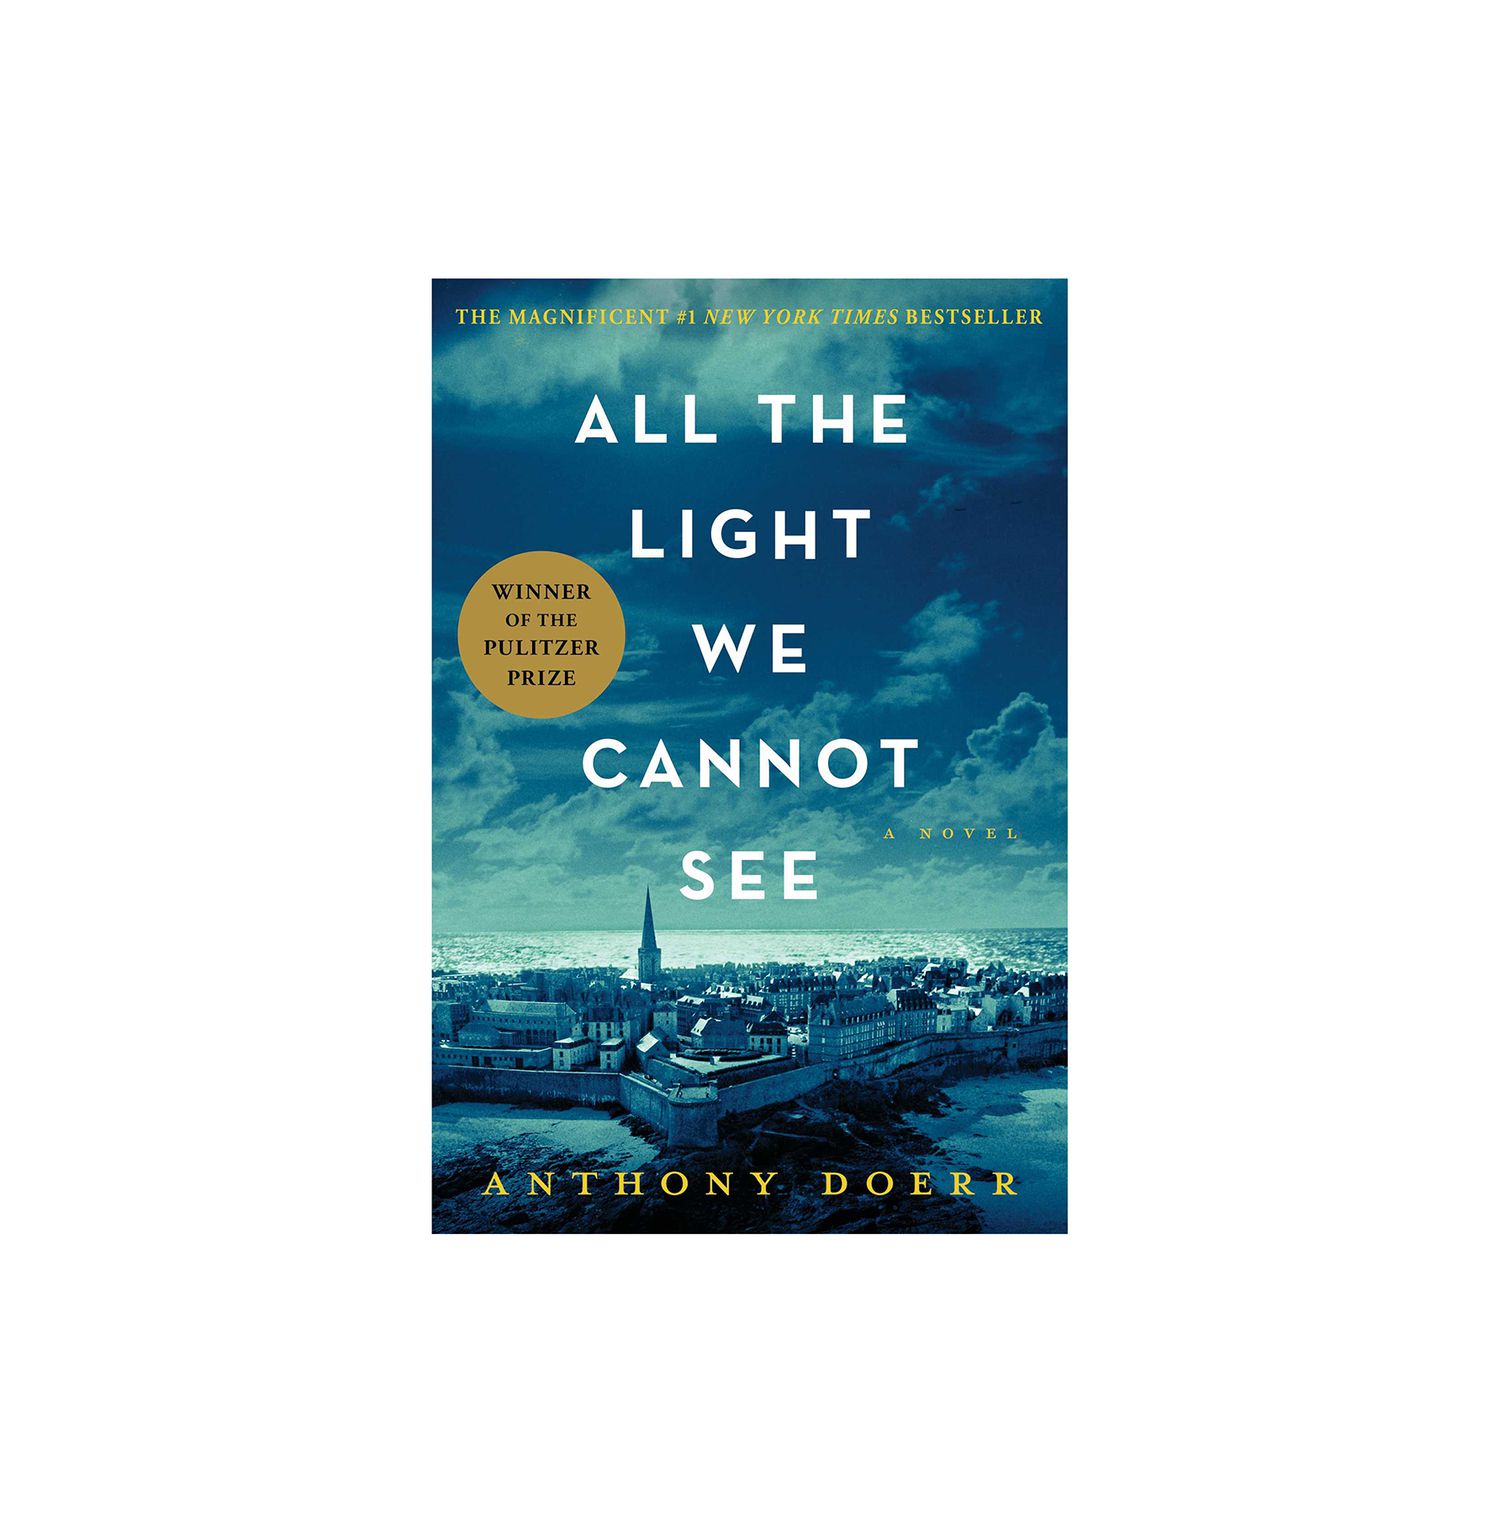 All the Light We Cannot See, by Anthony Doerr